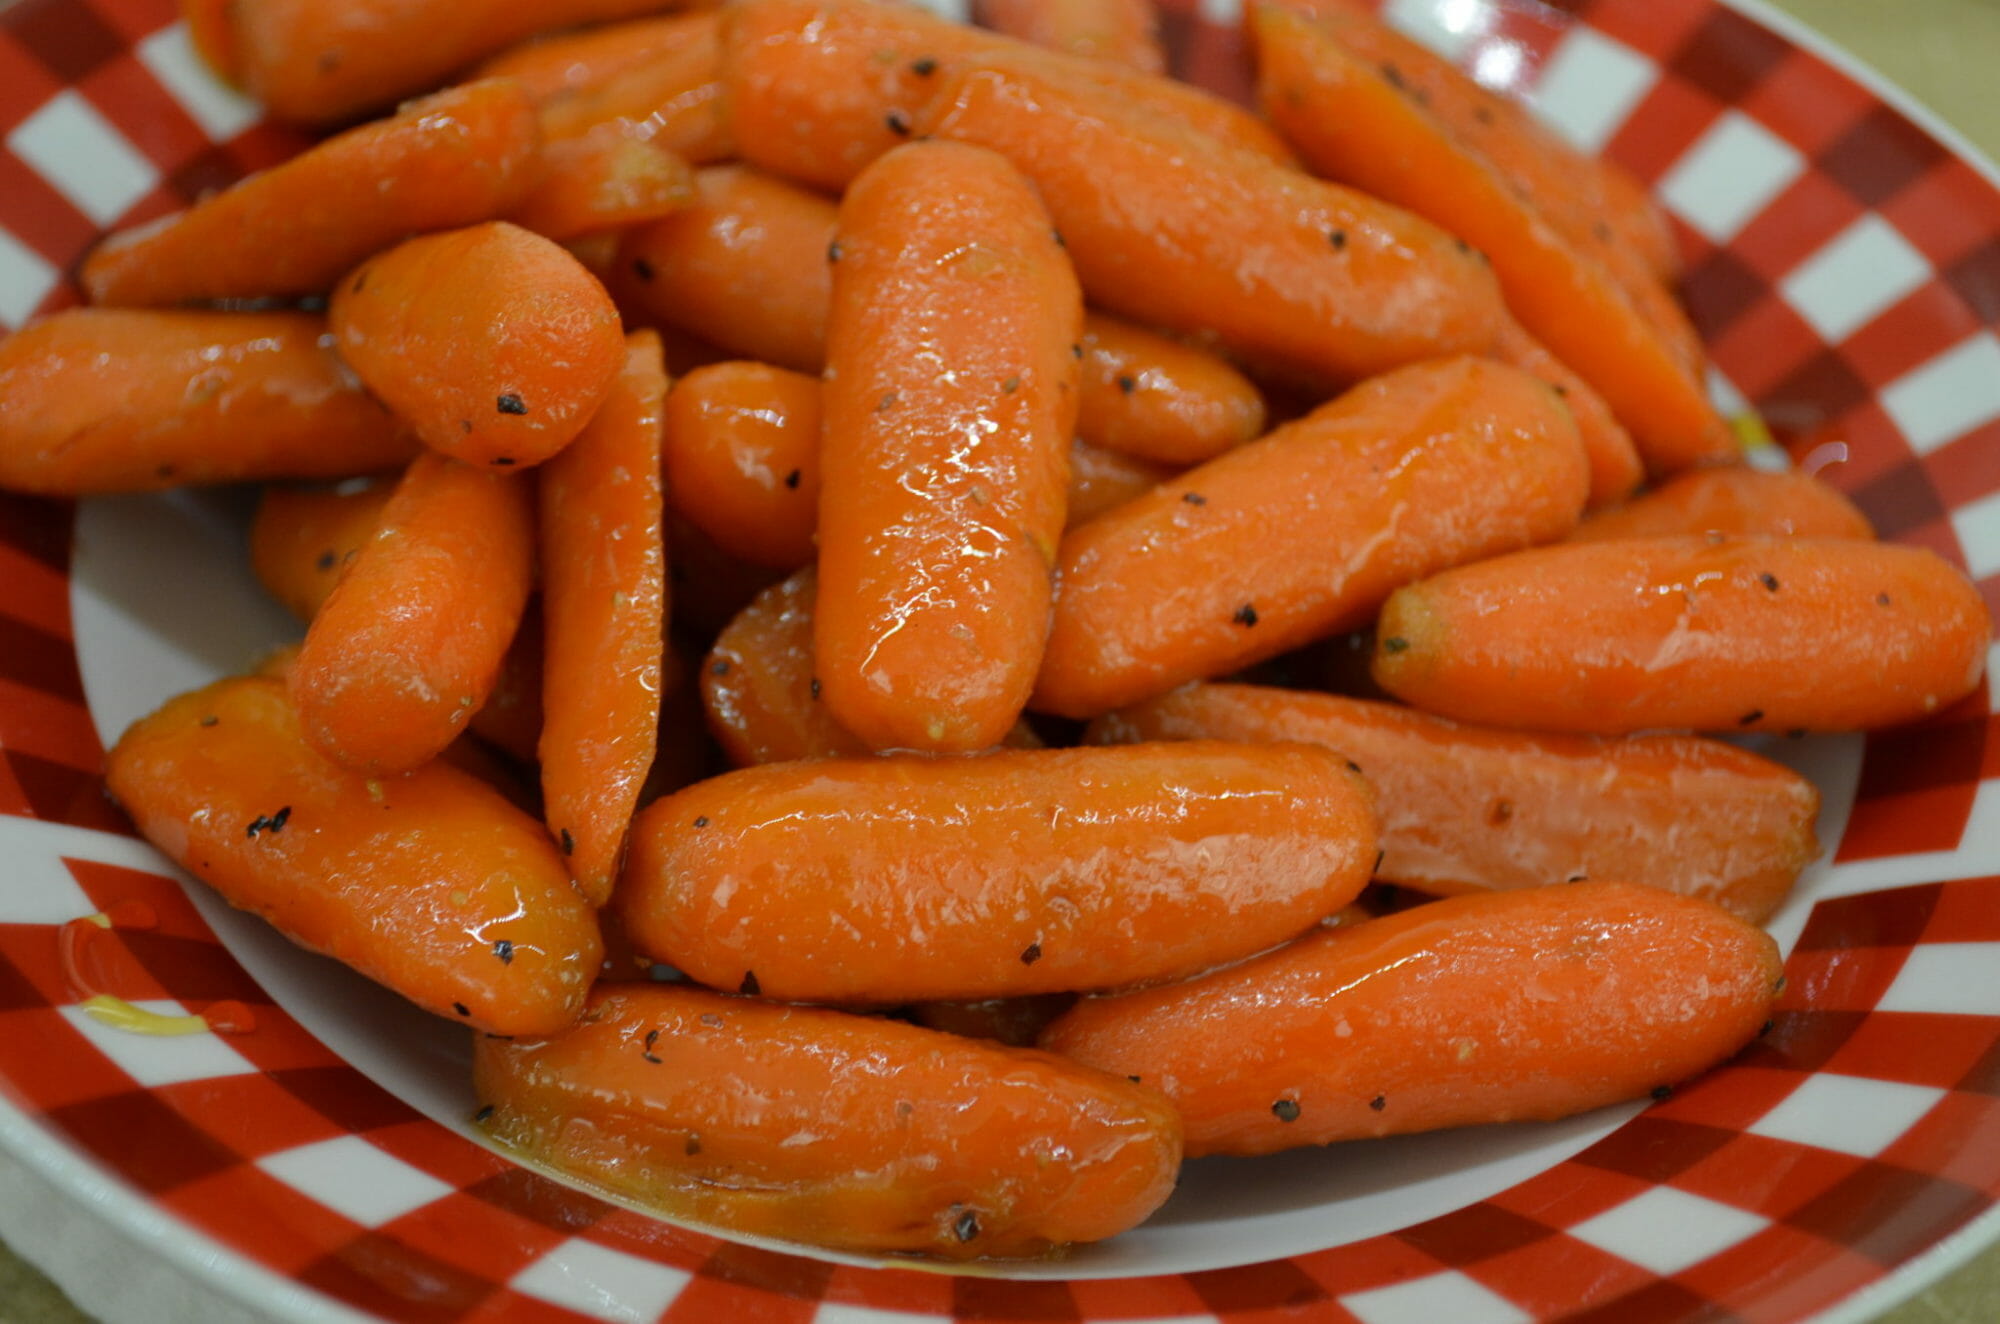 A red and white bowl filled with seasoned baby carrots.